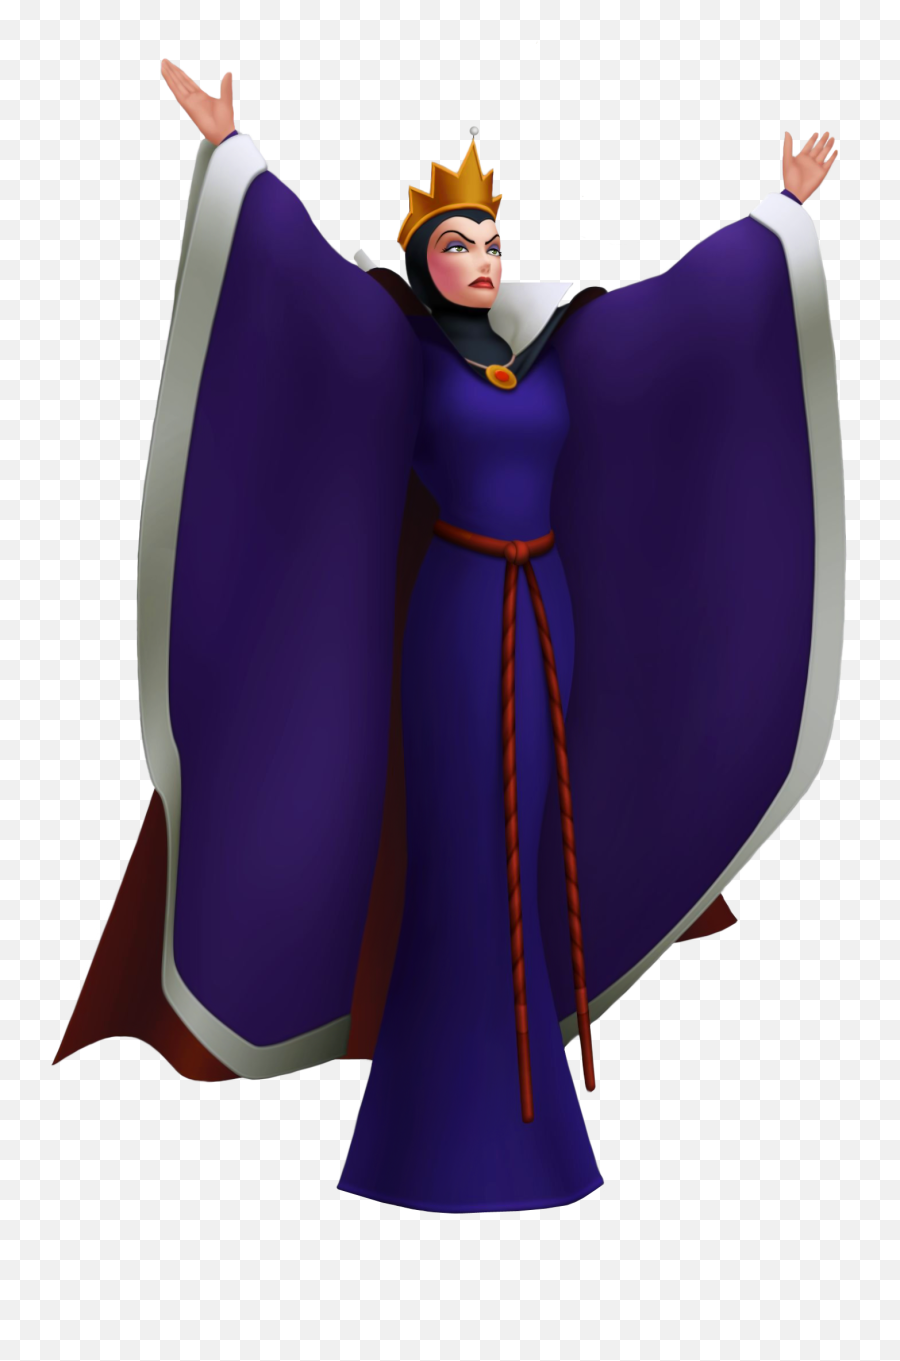 Queen Clipart Snow White Witch Queen Snow White Witch - Kingdom Hearts Snow White Queen Emoji,Queen Clipart